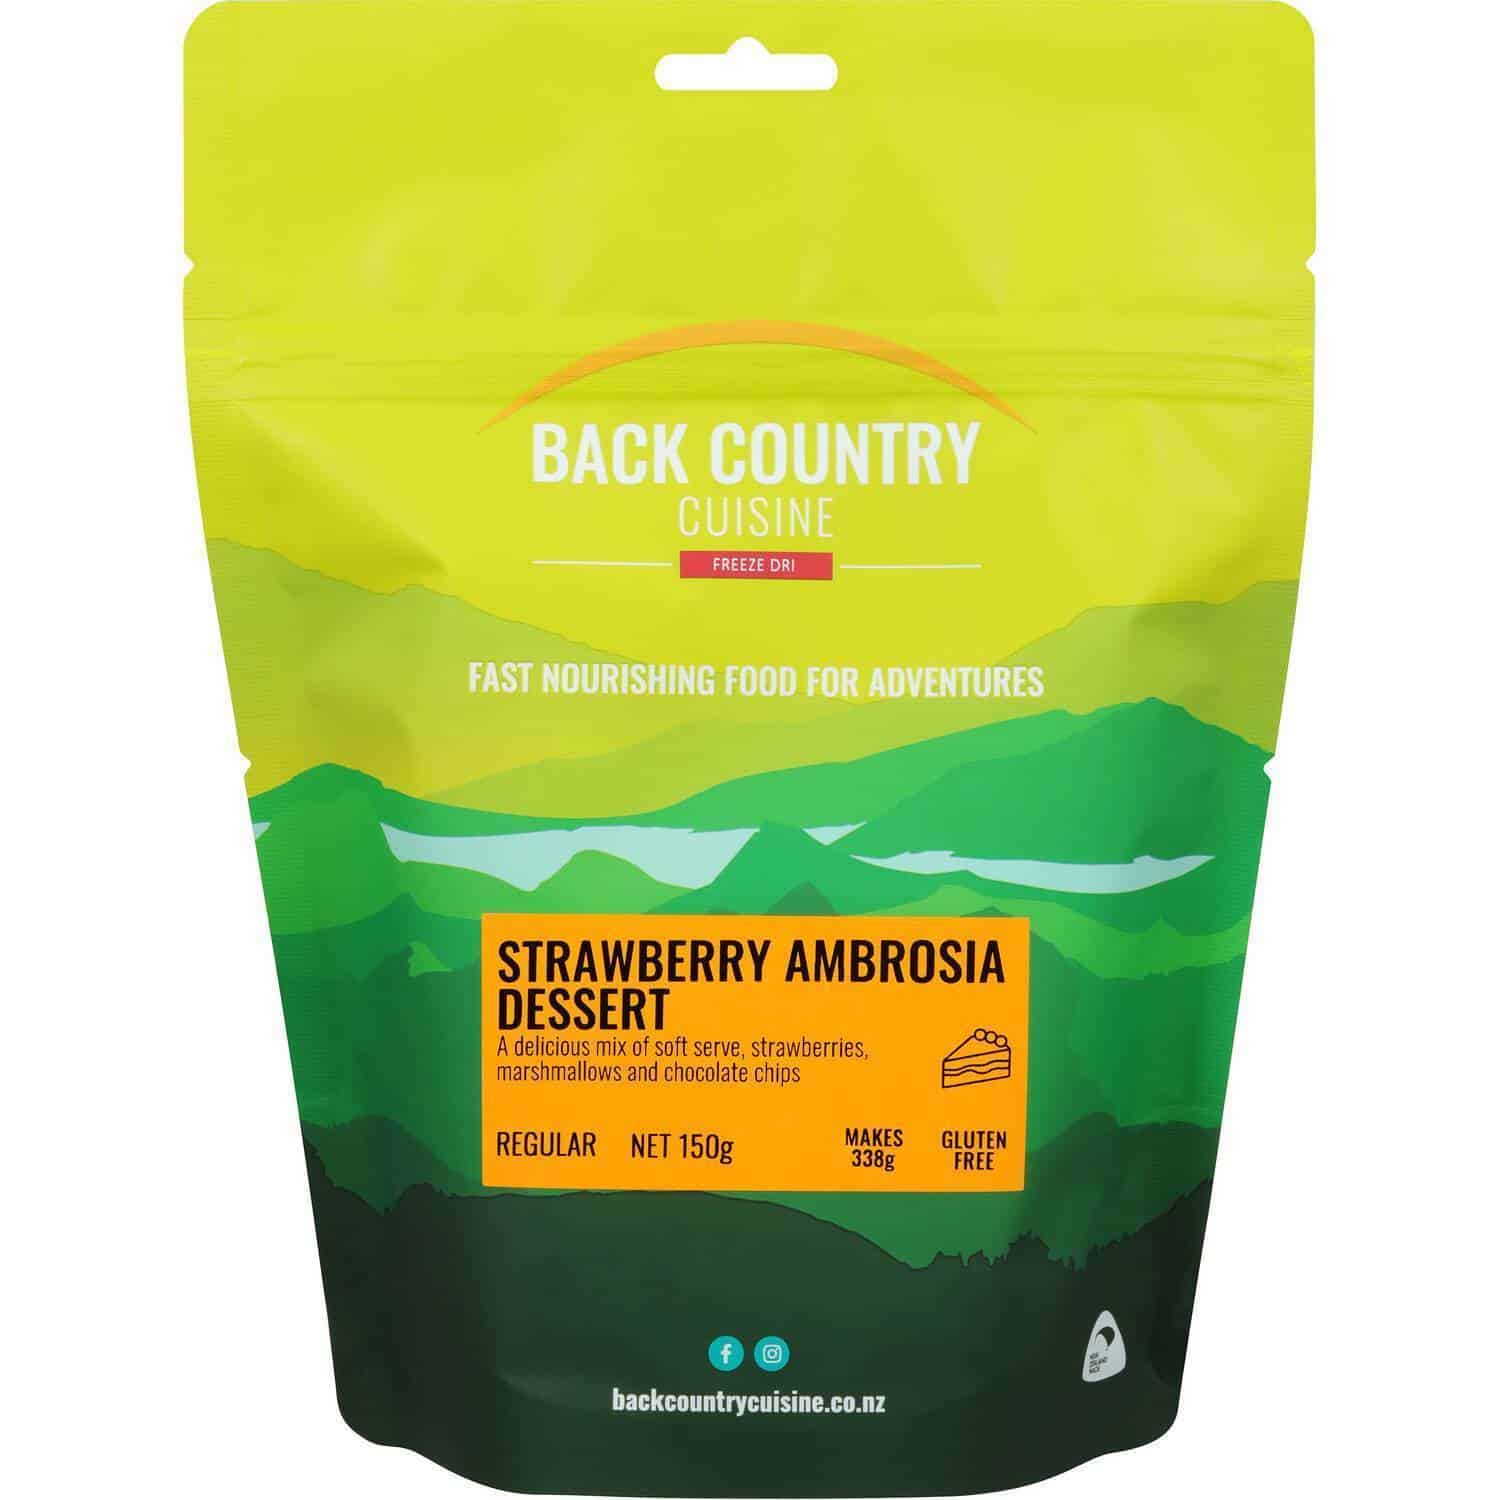 Back Country Cuisine Strawberry Ambrosia Dessert - Tramping Food and Accessories sold by Venture Outdoors NZ